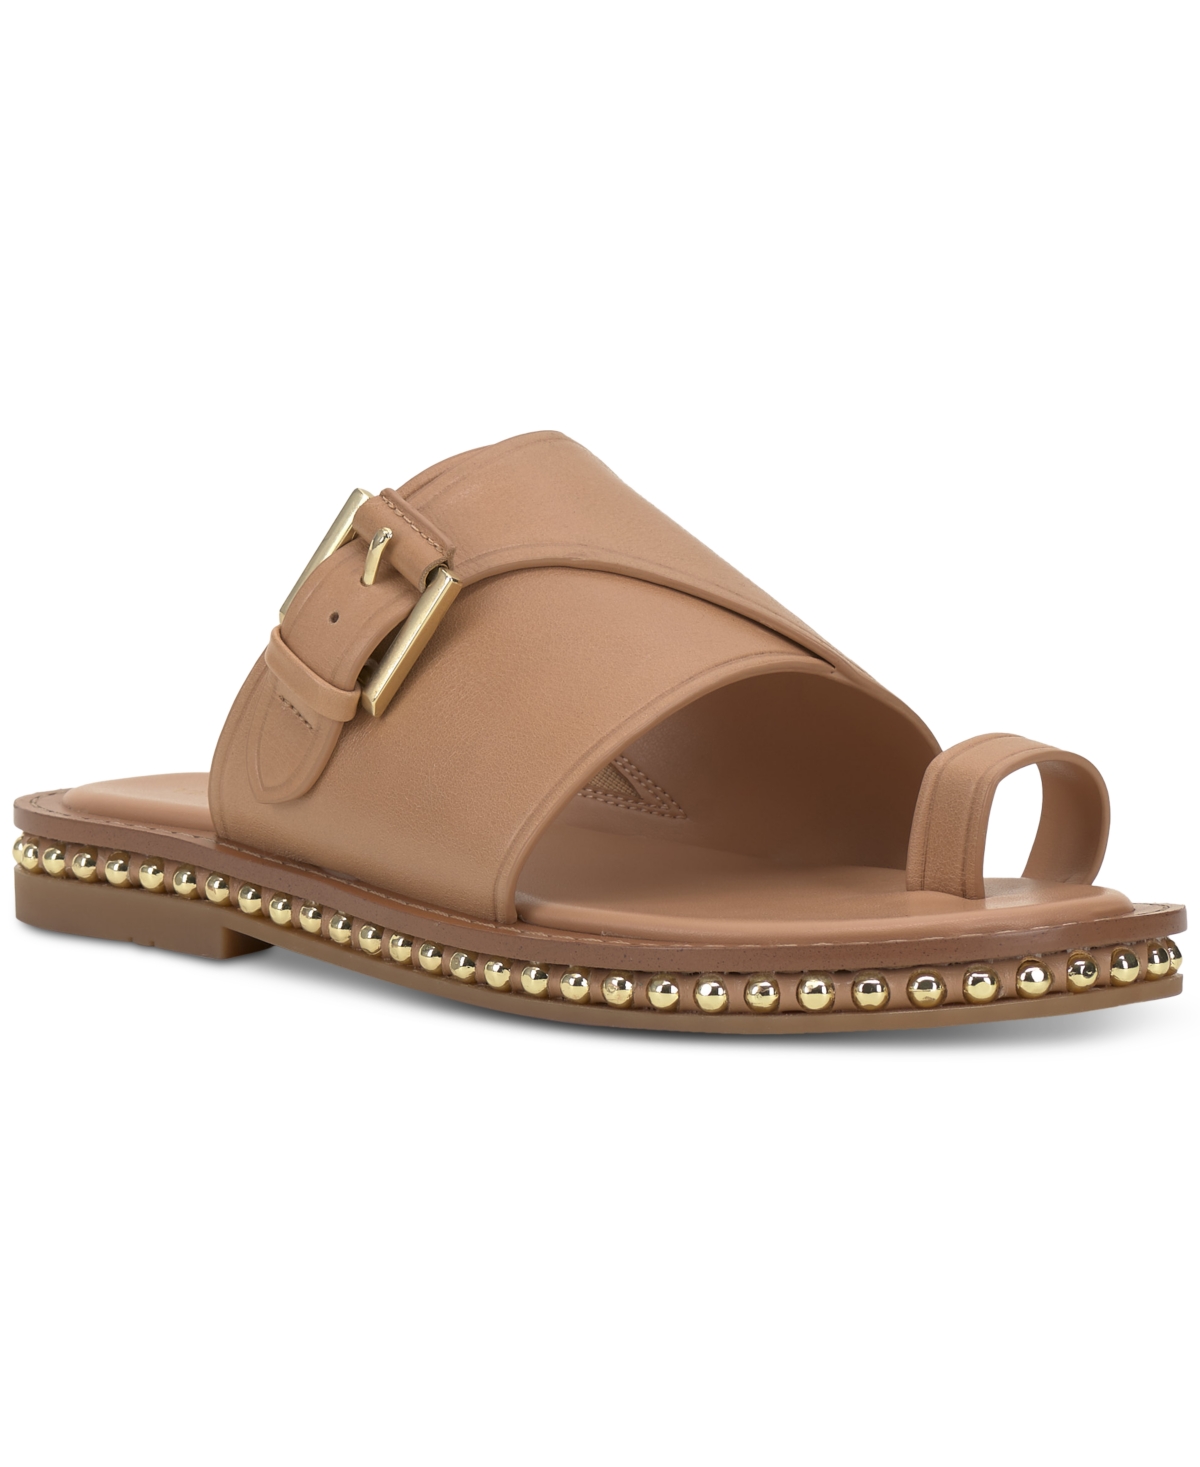 UPC 196672388642 product image for Vince Camuto Women's Cooliann Hooded Thong Flat Sandals Women's Shoes | upcitemdb.com